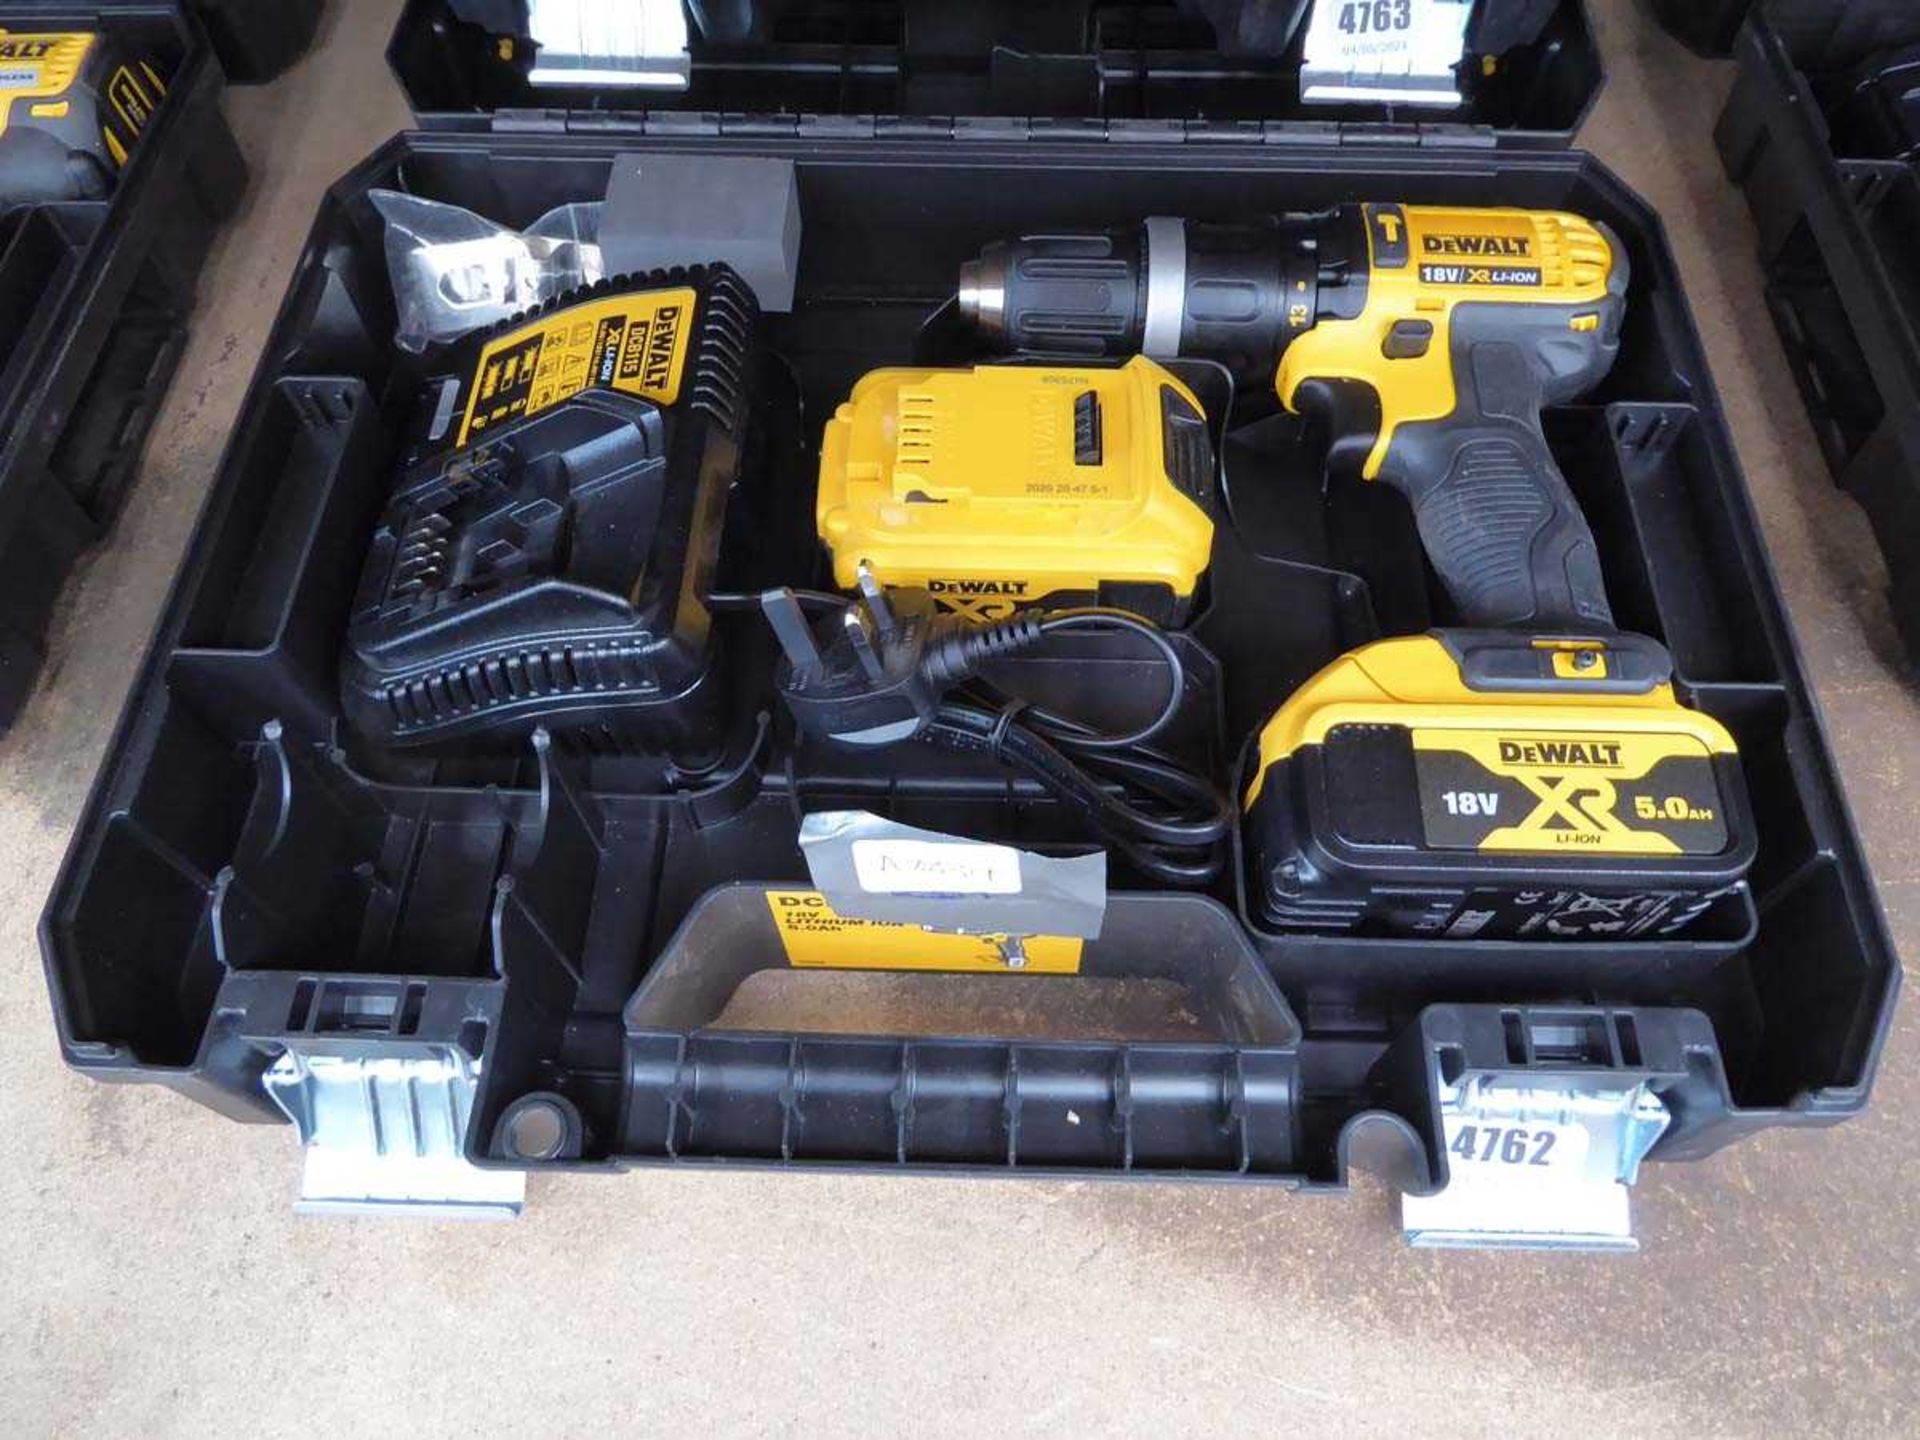 Dewalt 18v battery drill complete with 2 batteries and charger